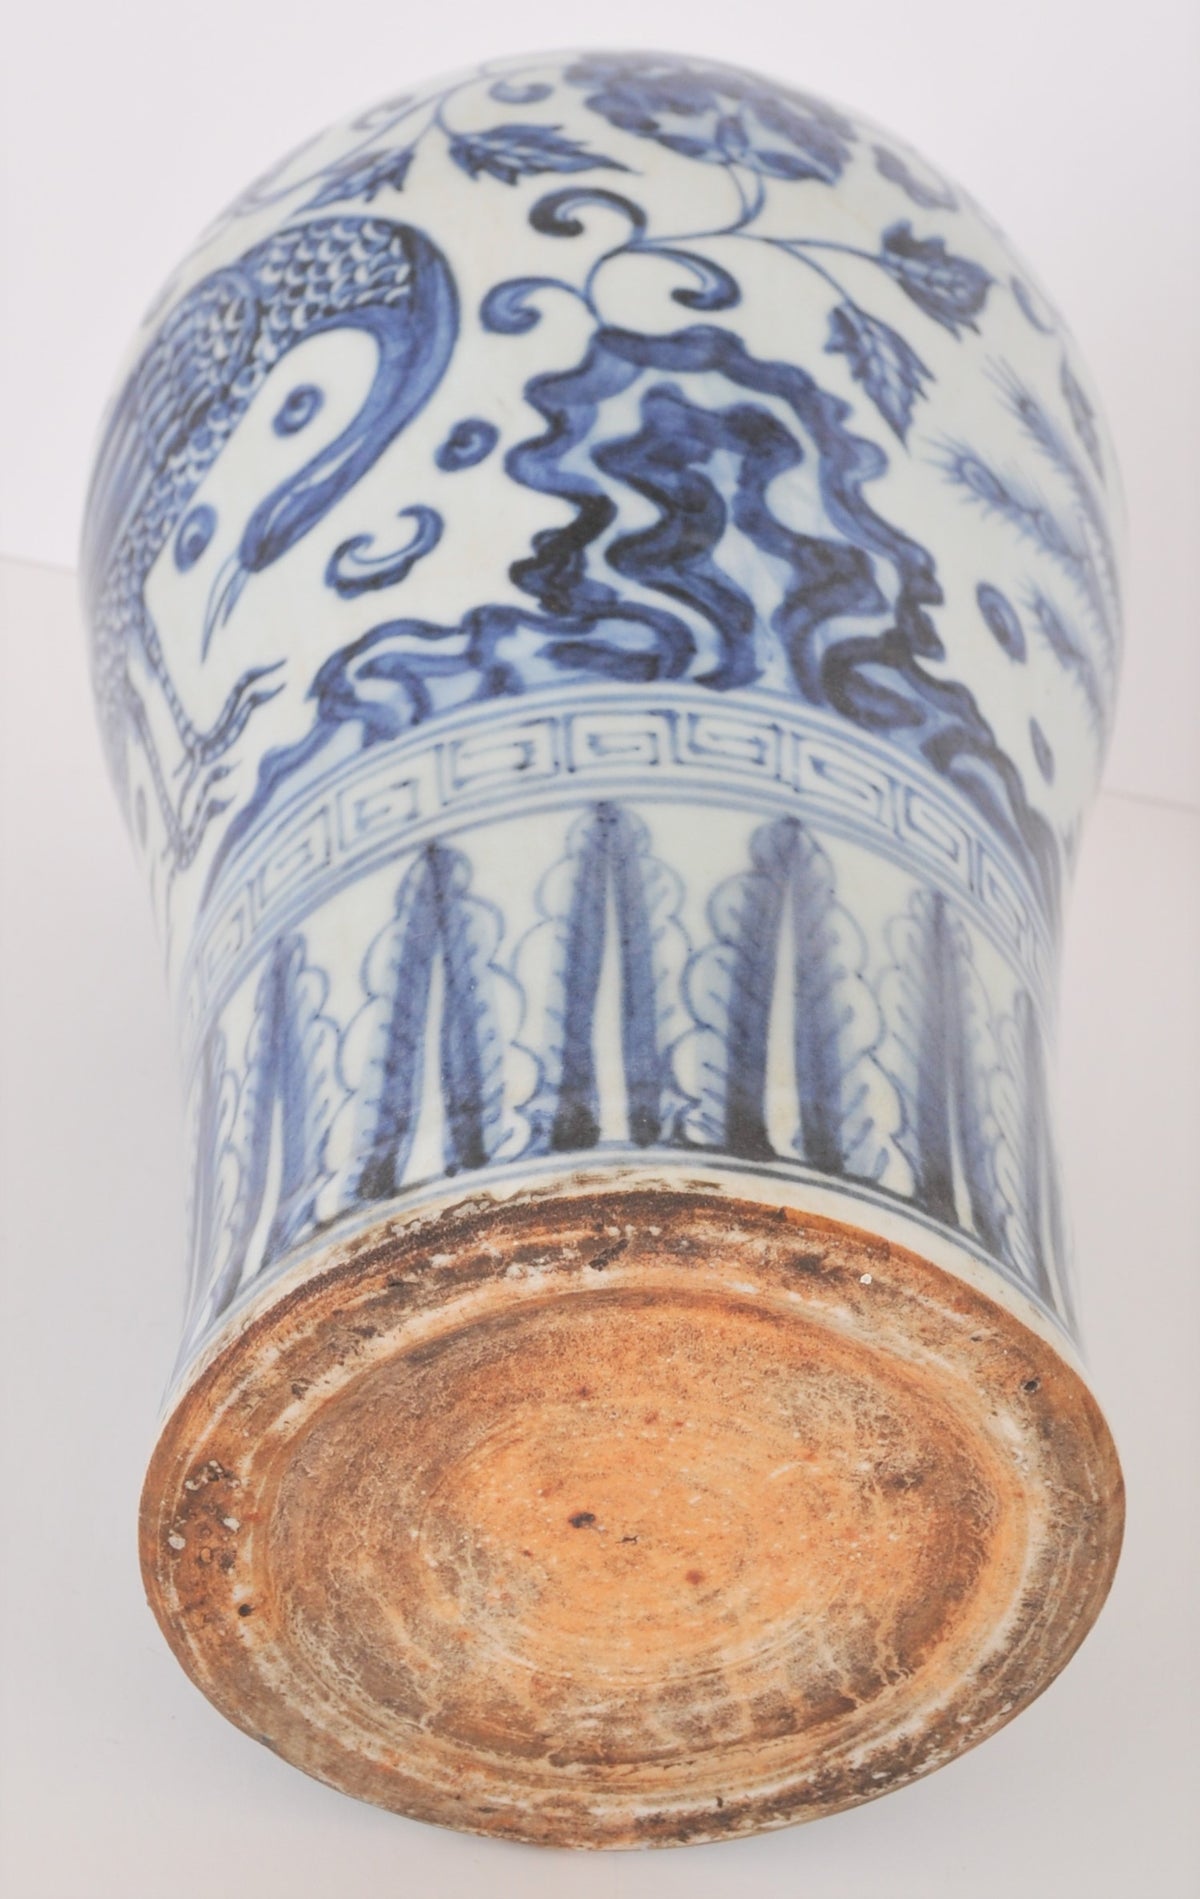 Antique Chinese Qing Dynasty Blue & White Porcelain Meiping Shaped Vase, Circa 1880